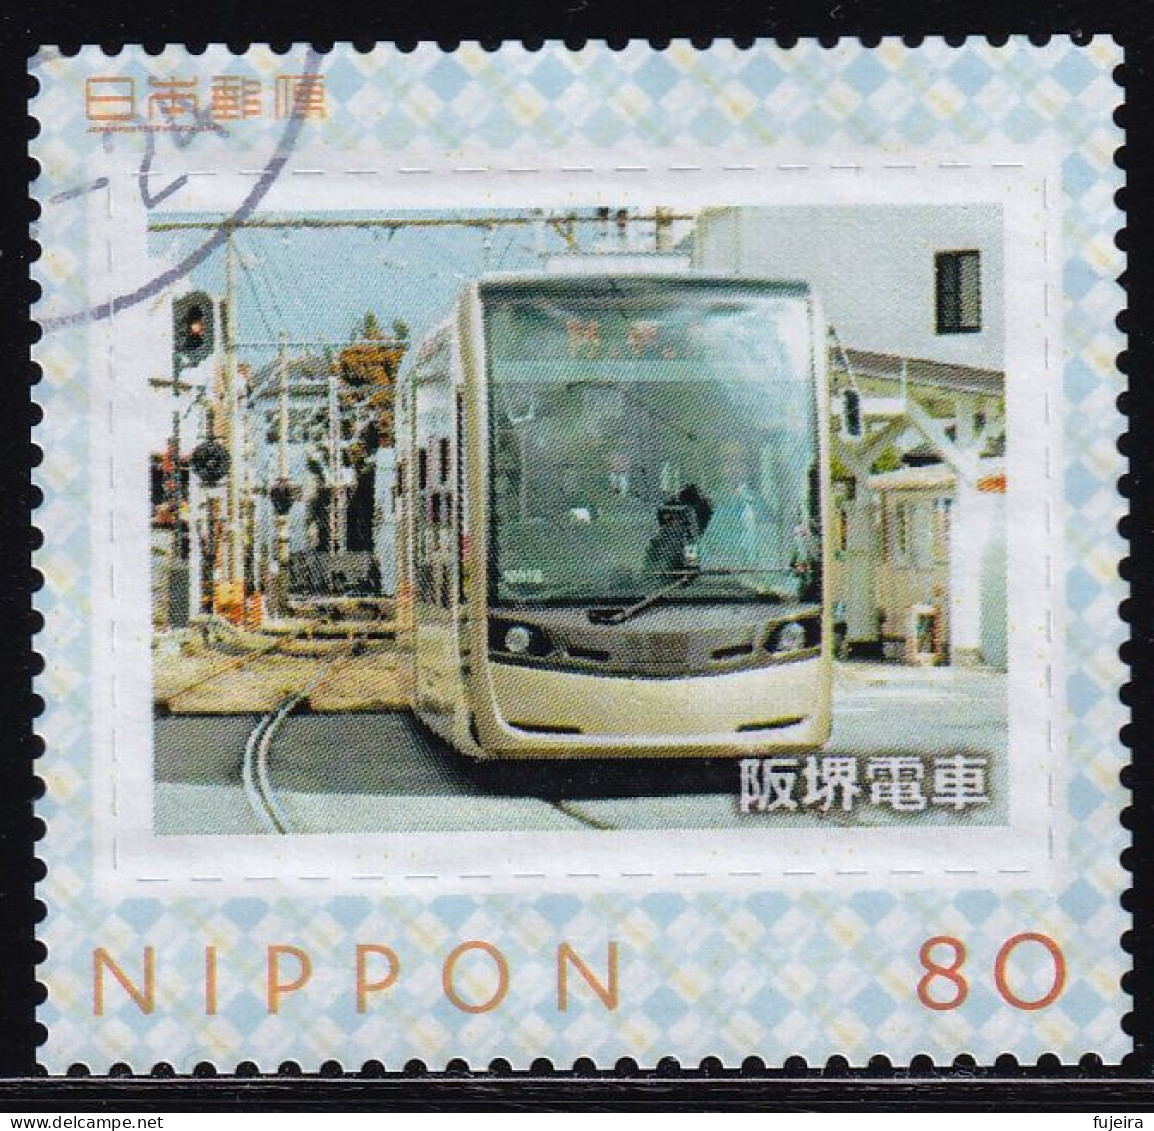 Japan Personalized Stamp, Tram (jpv9613) Used - Used Stamps